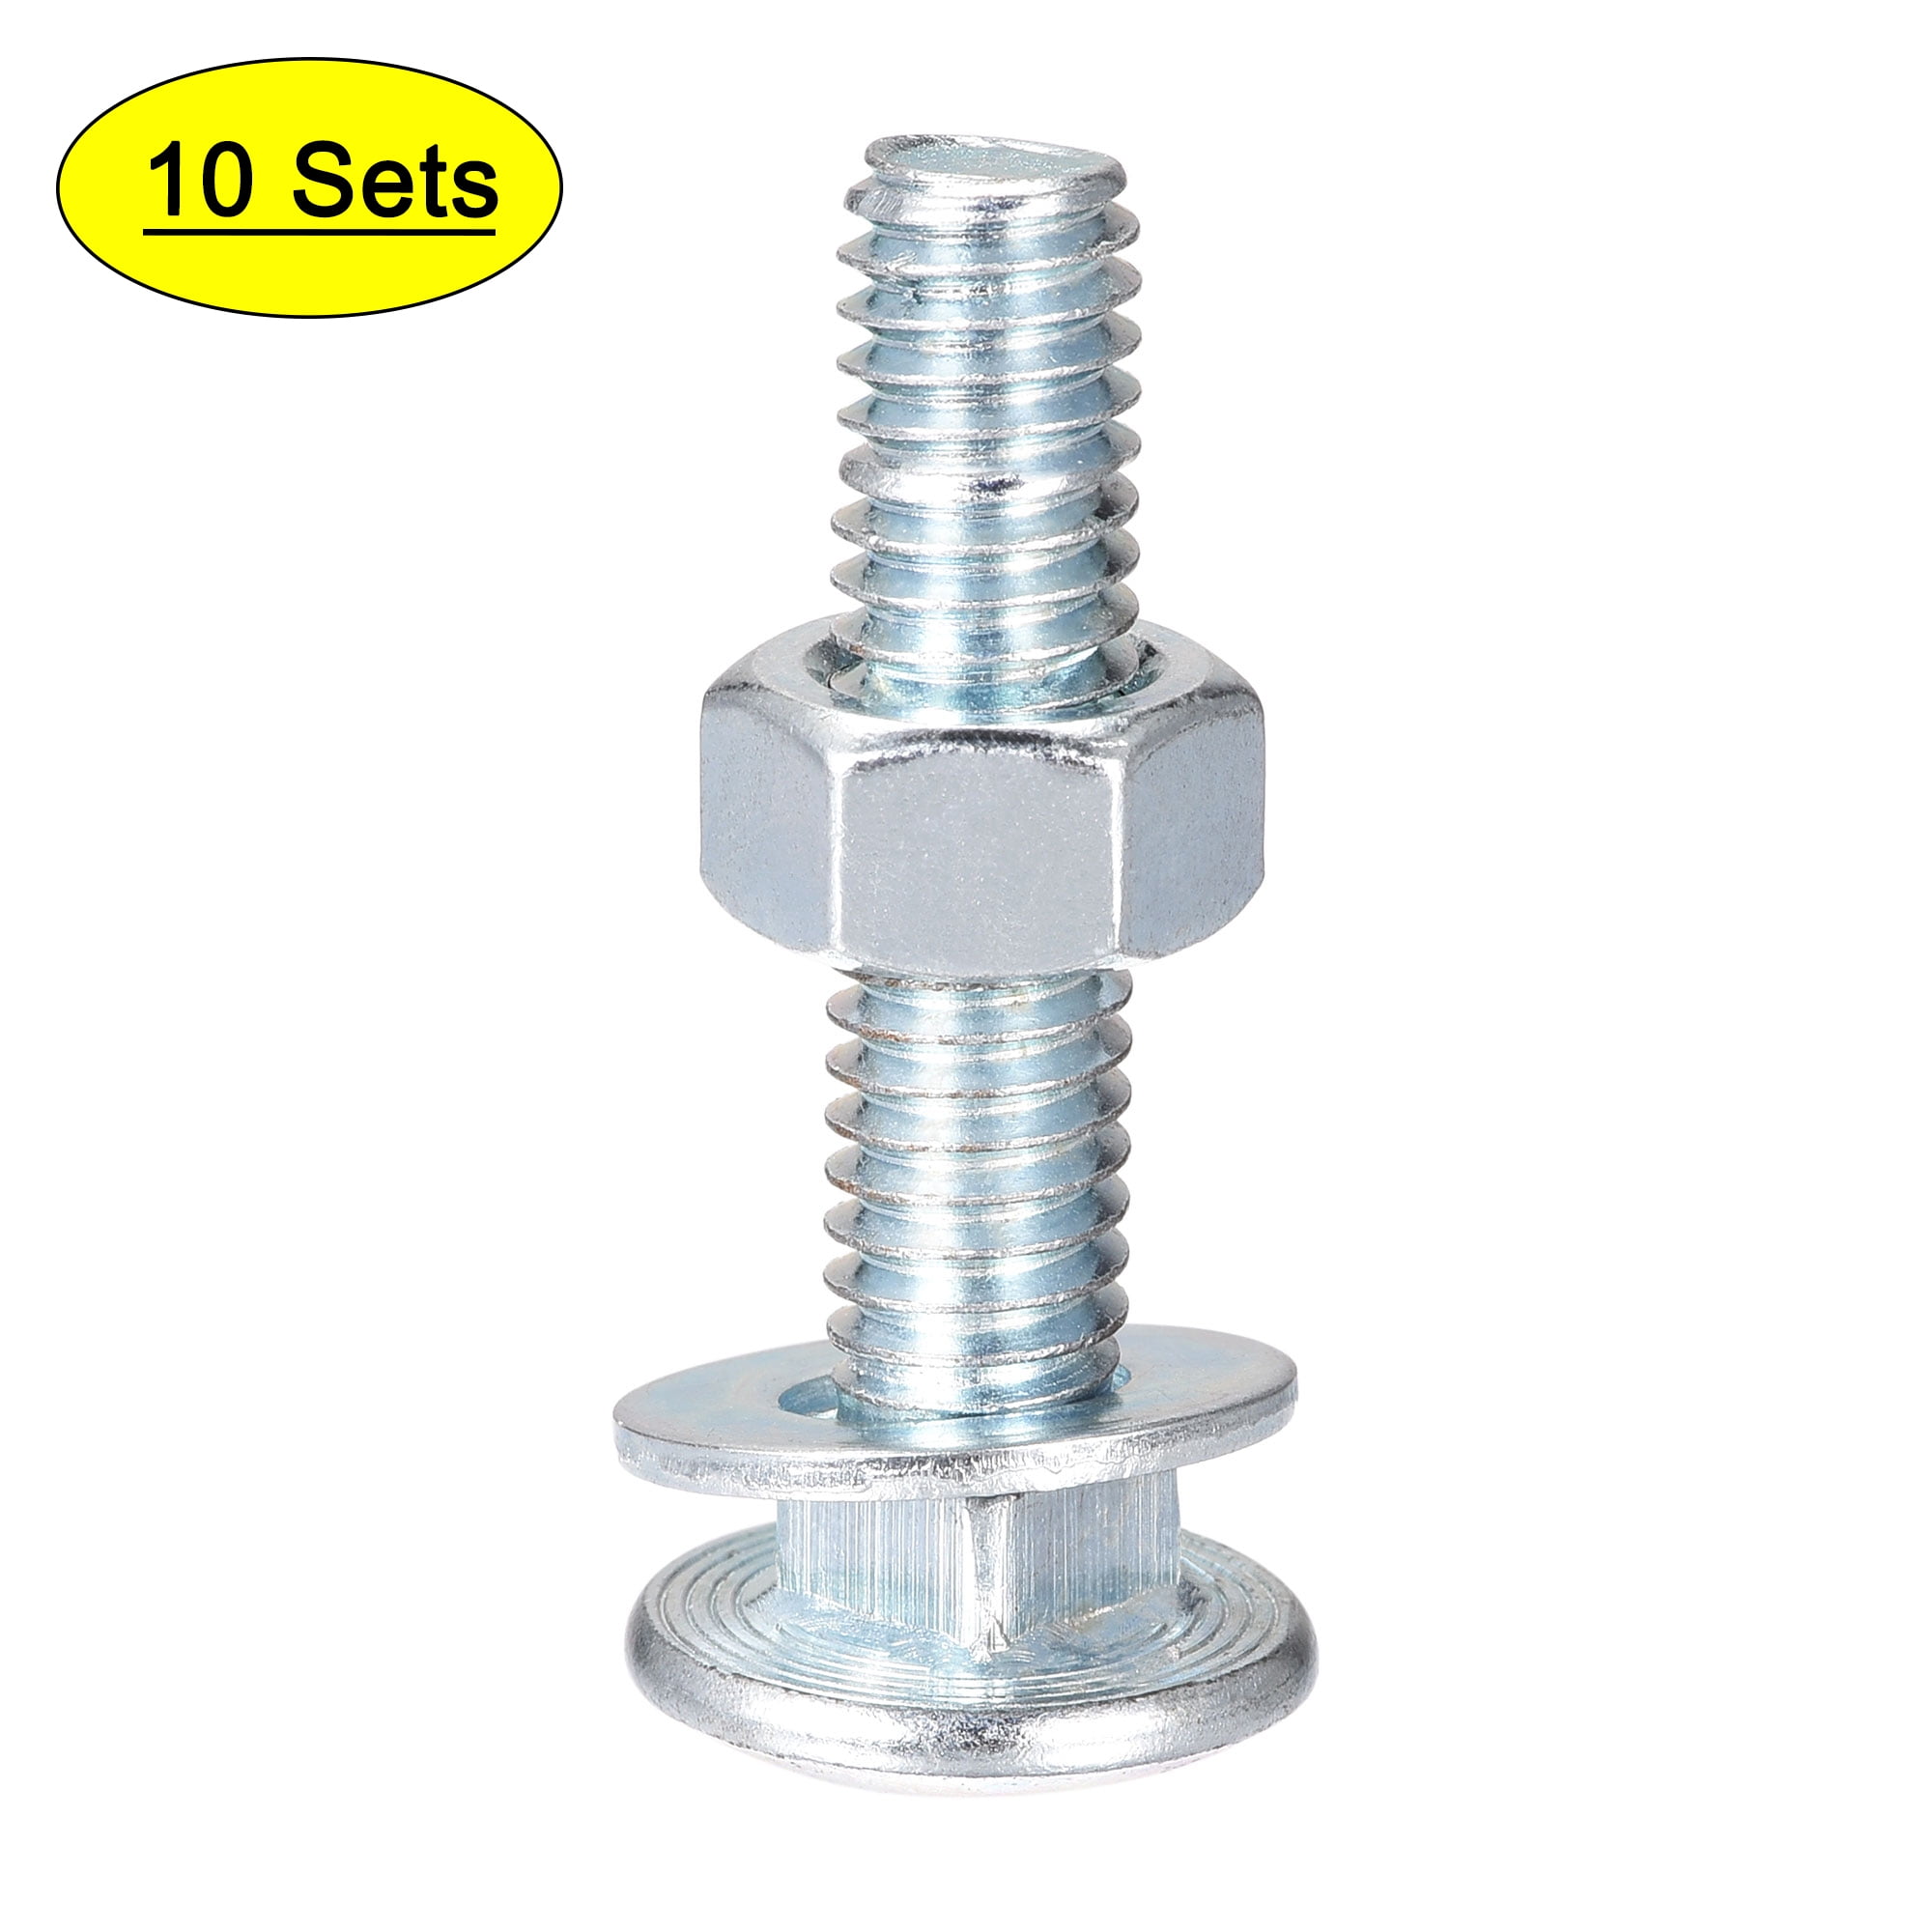 5/16-18x2 Stainless Carriage Bolts round Head Screws With Nuts & Washers 50 